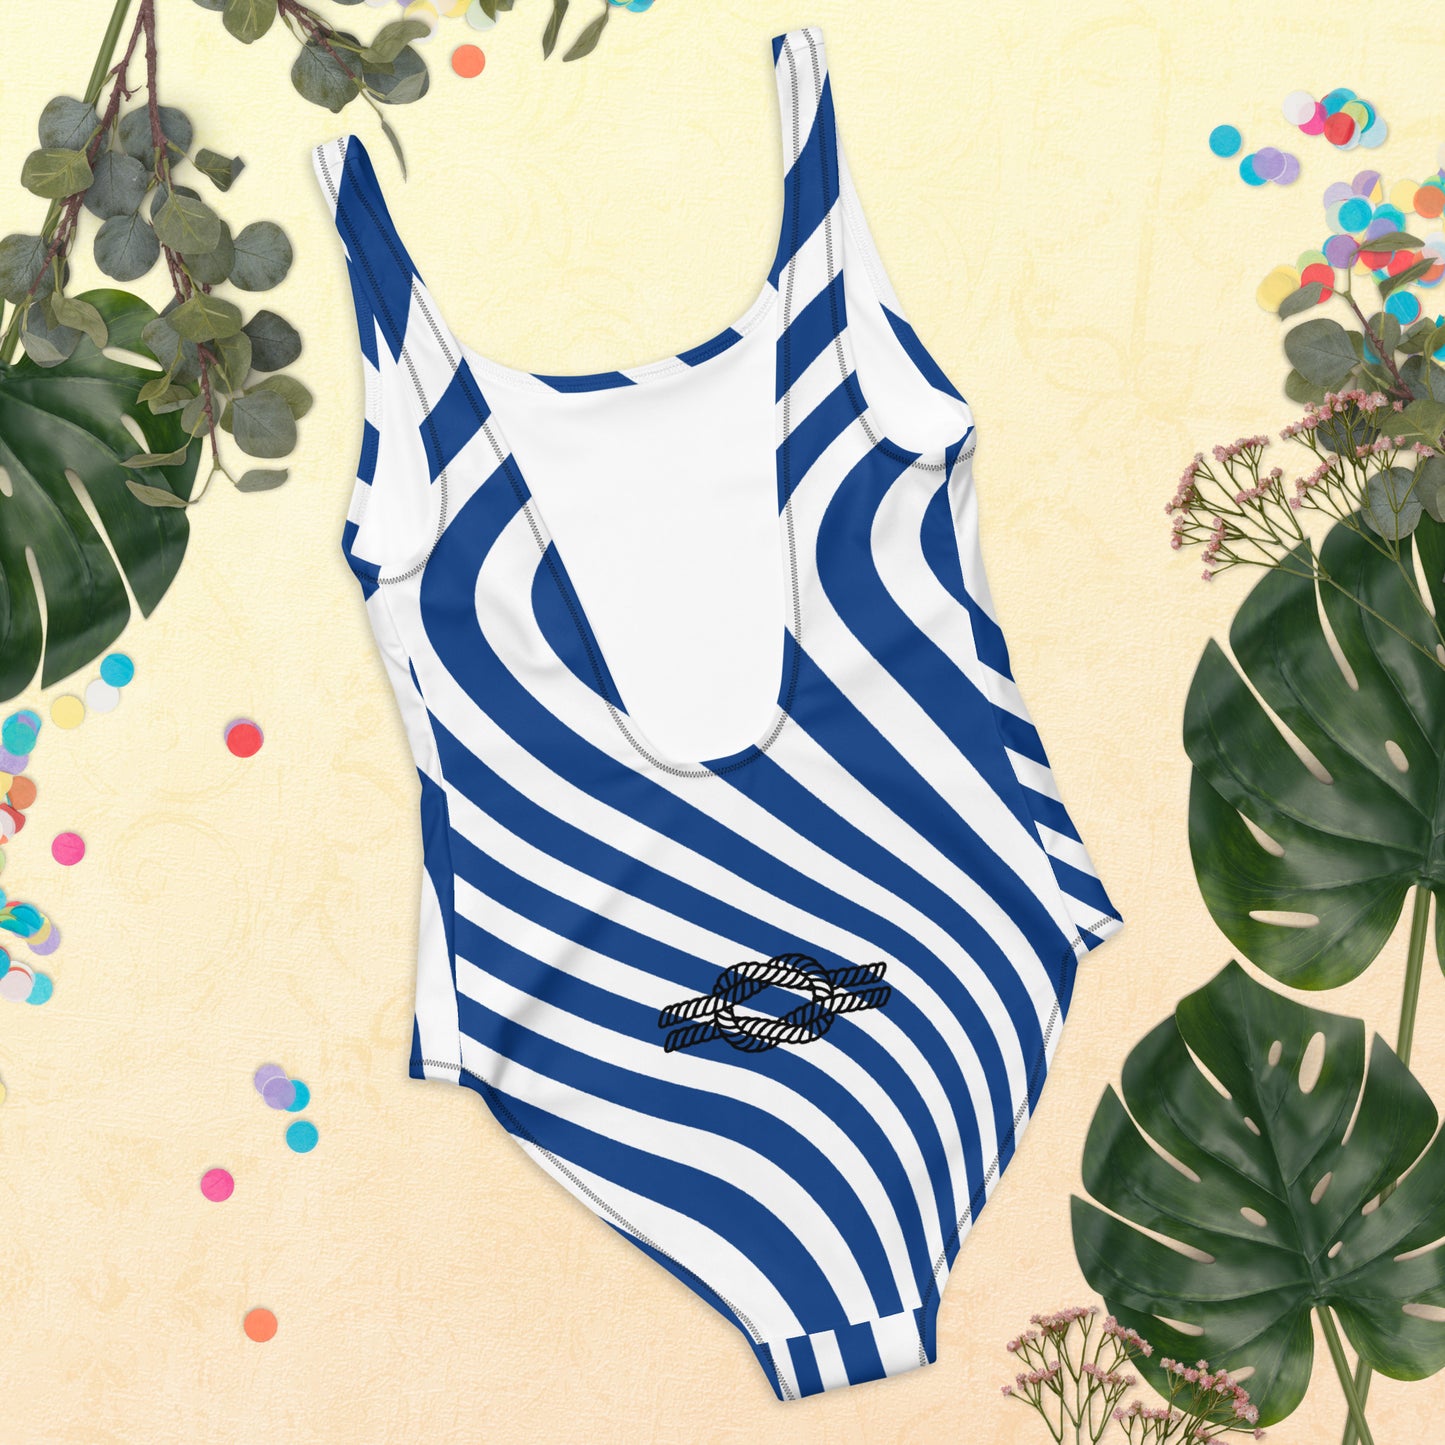 Summer Vibes Collection One-Piece Swimsuit by Our BoatyVerse